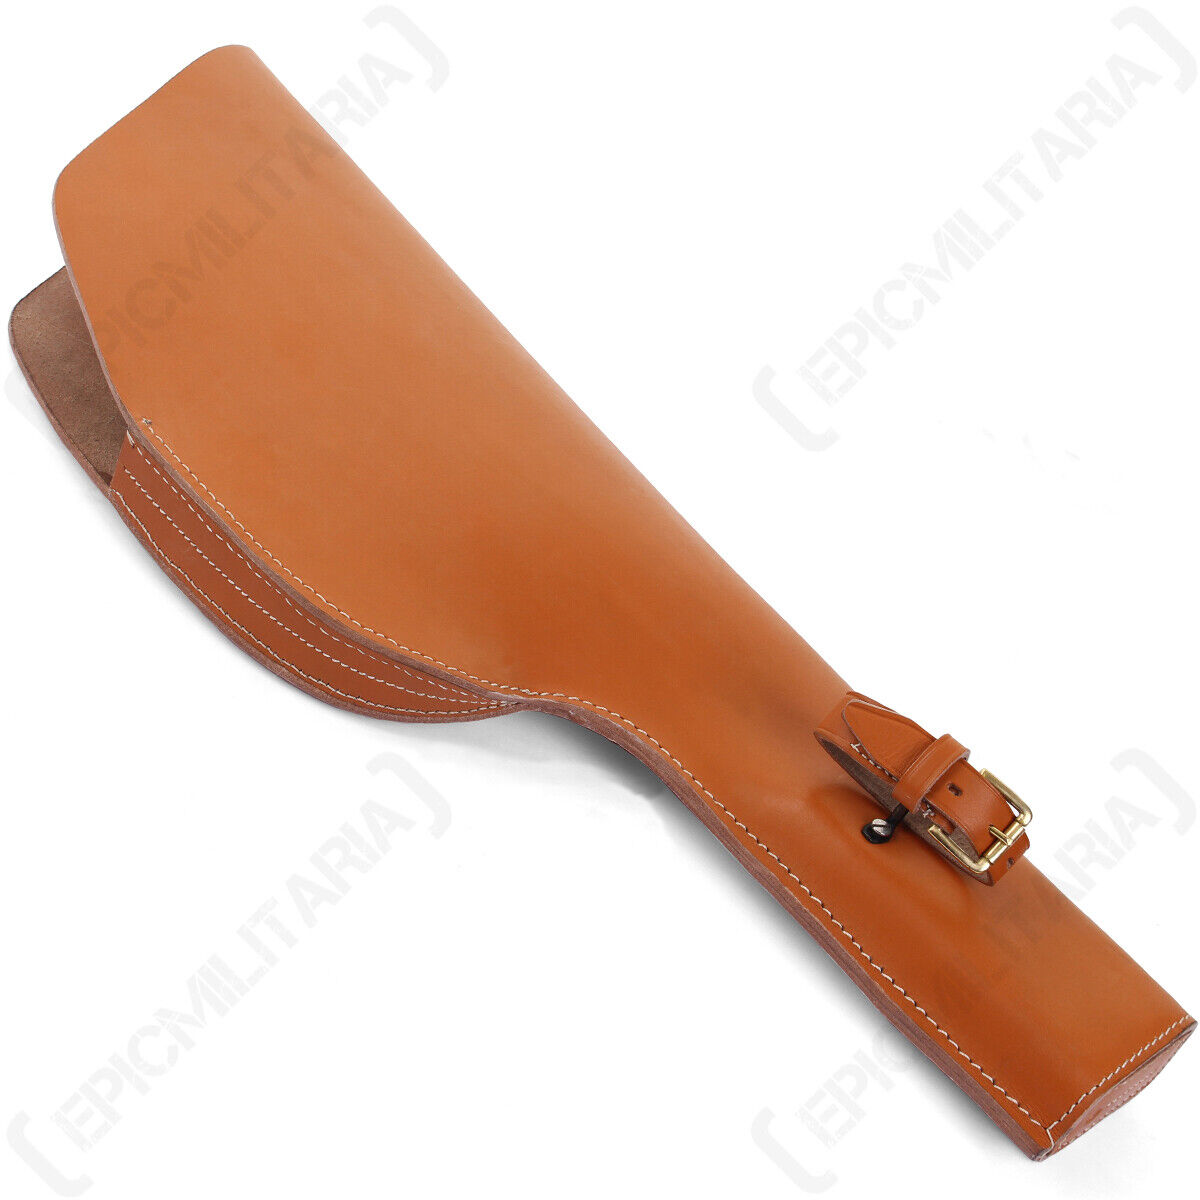 US WW2 Thompson Brown Leather Vehicle Scabbard Holster - American Military Repro